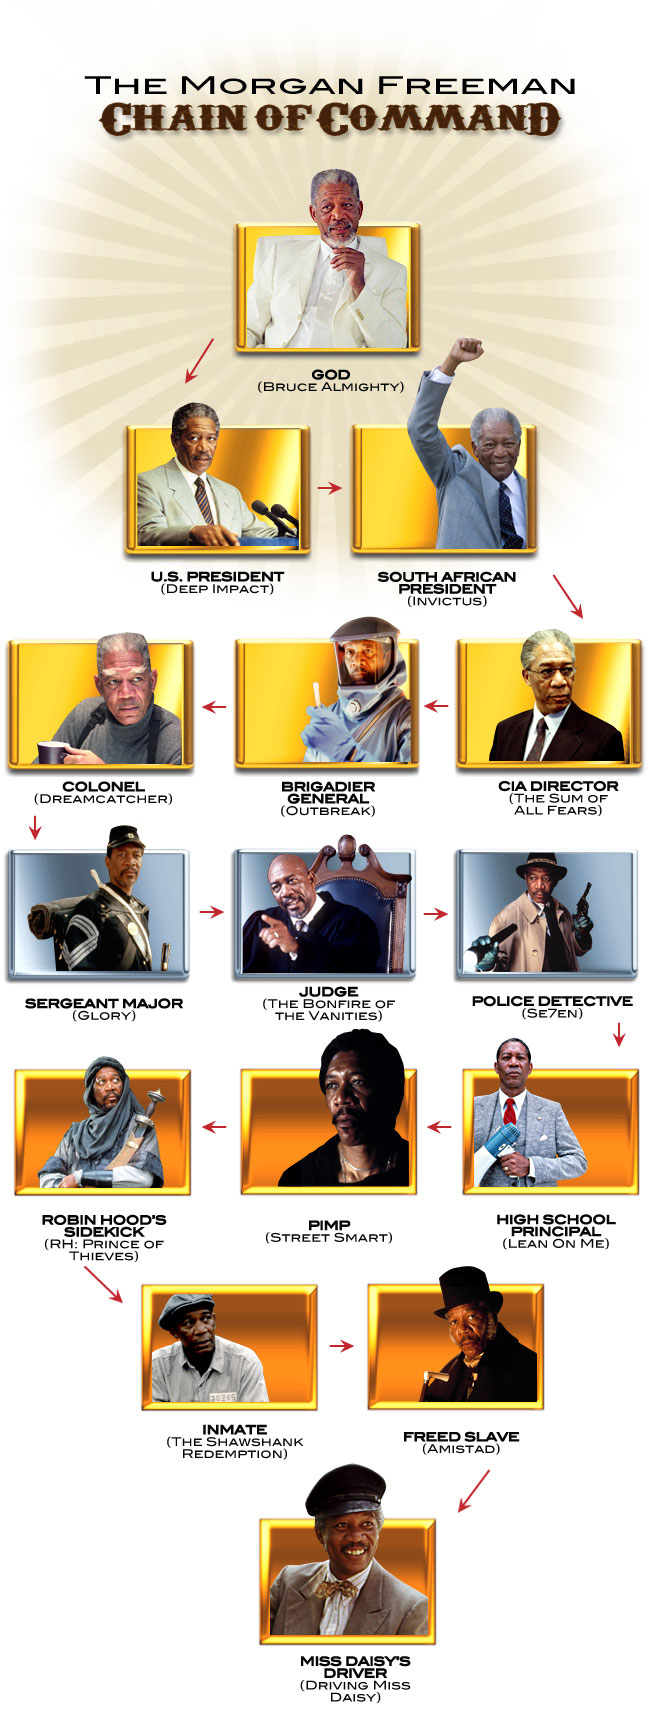 The official Morgan Freeman Chain of Command has finally been released ...